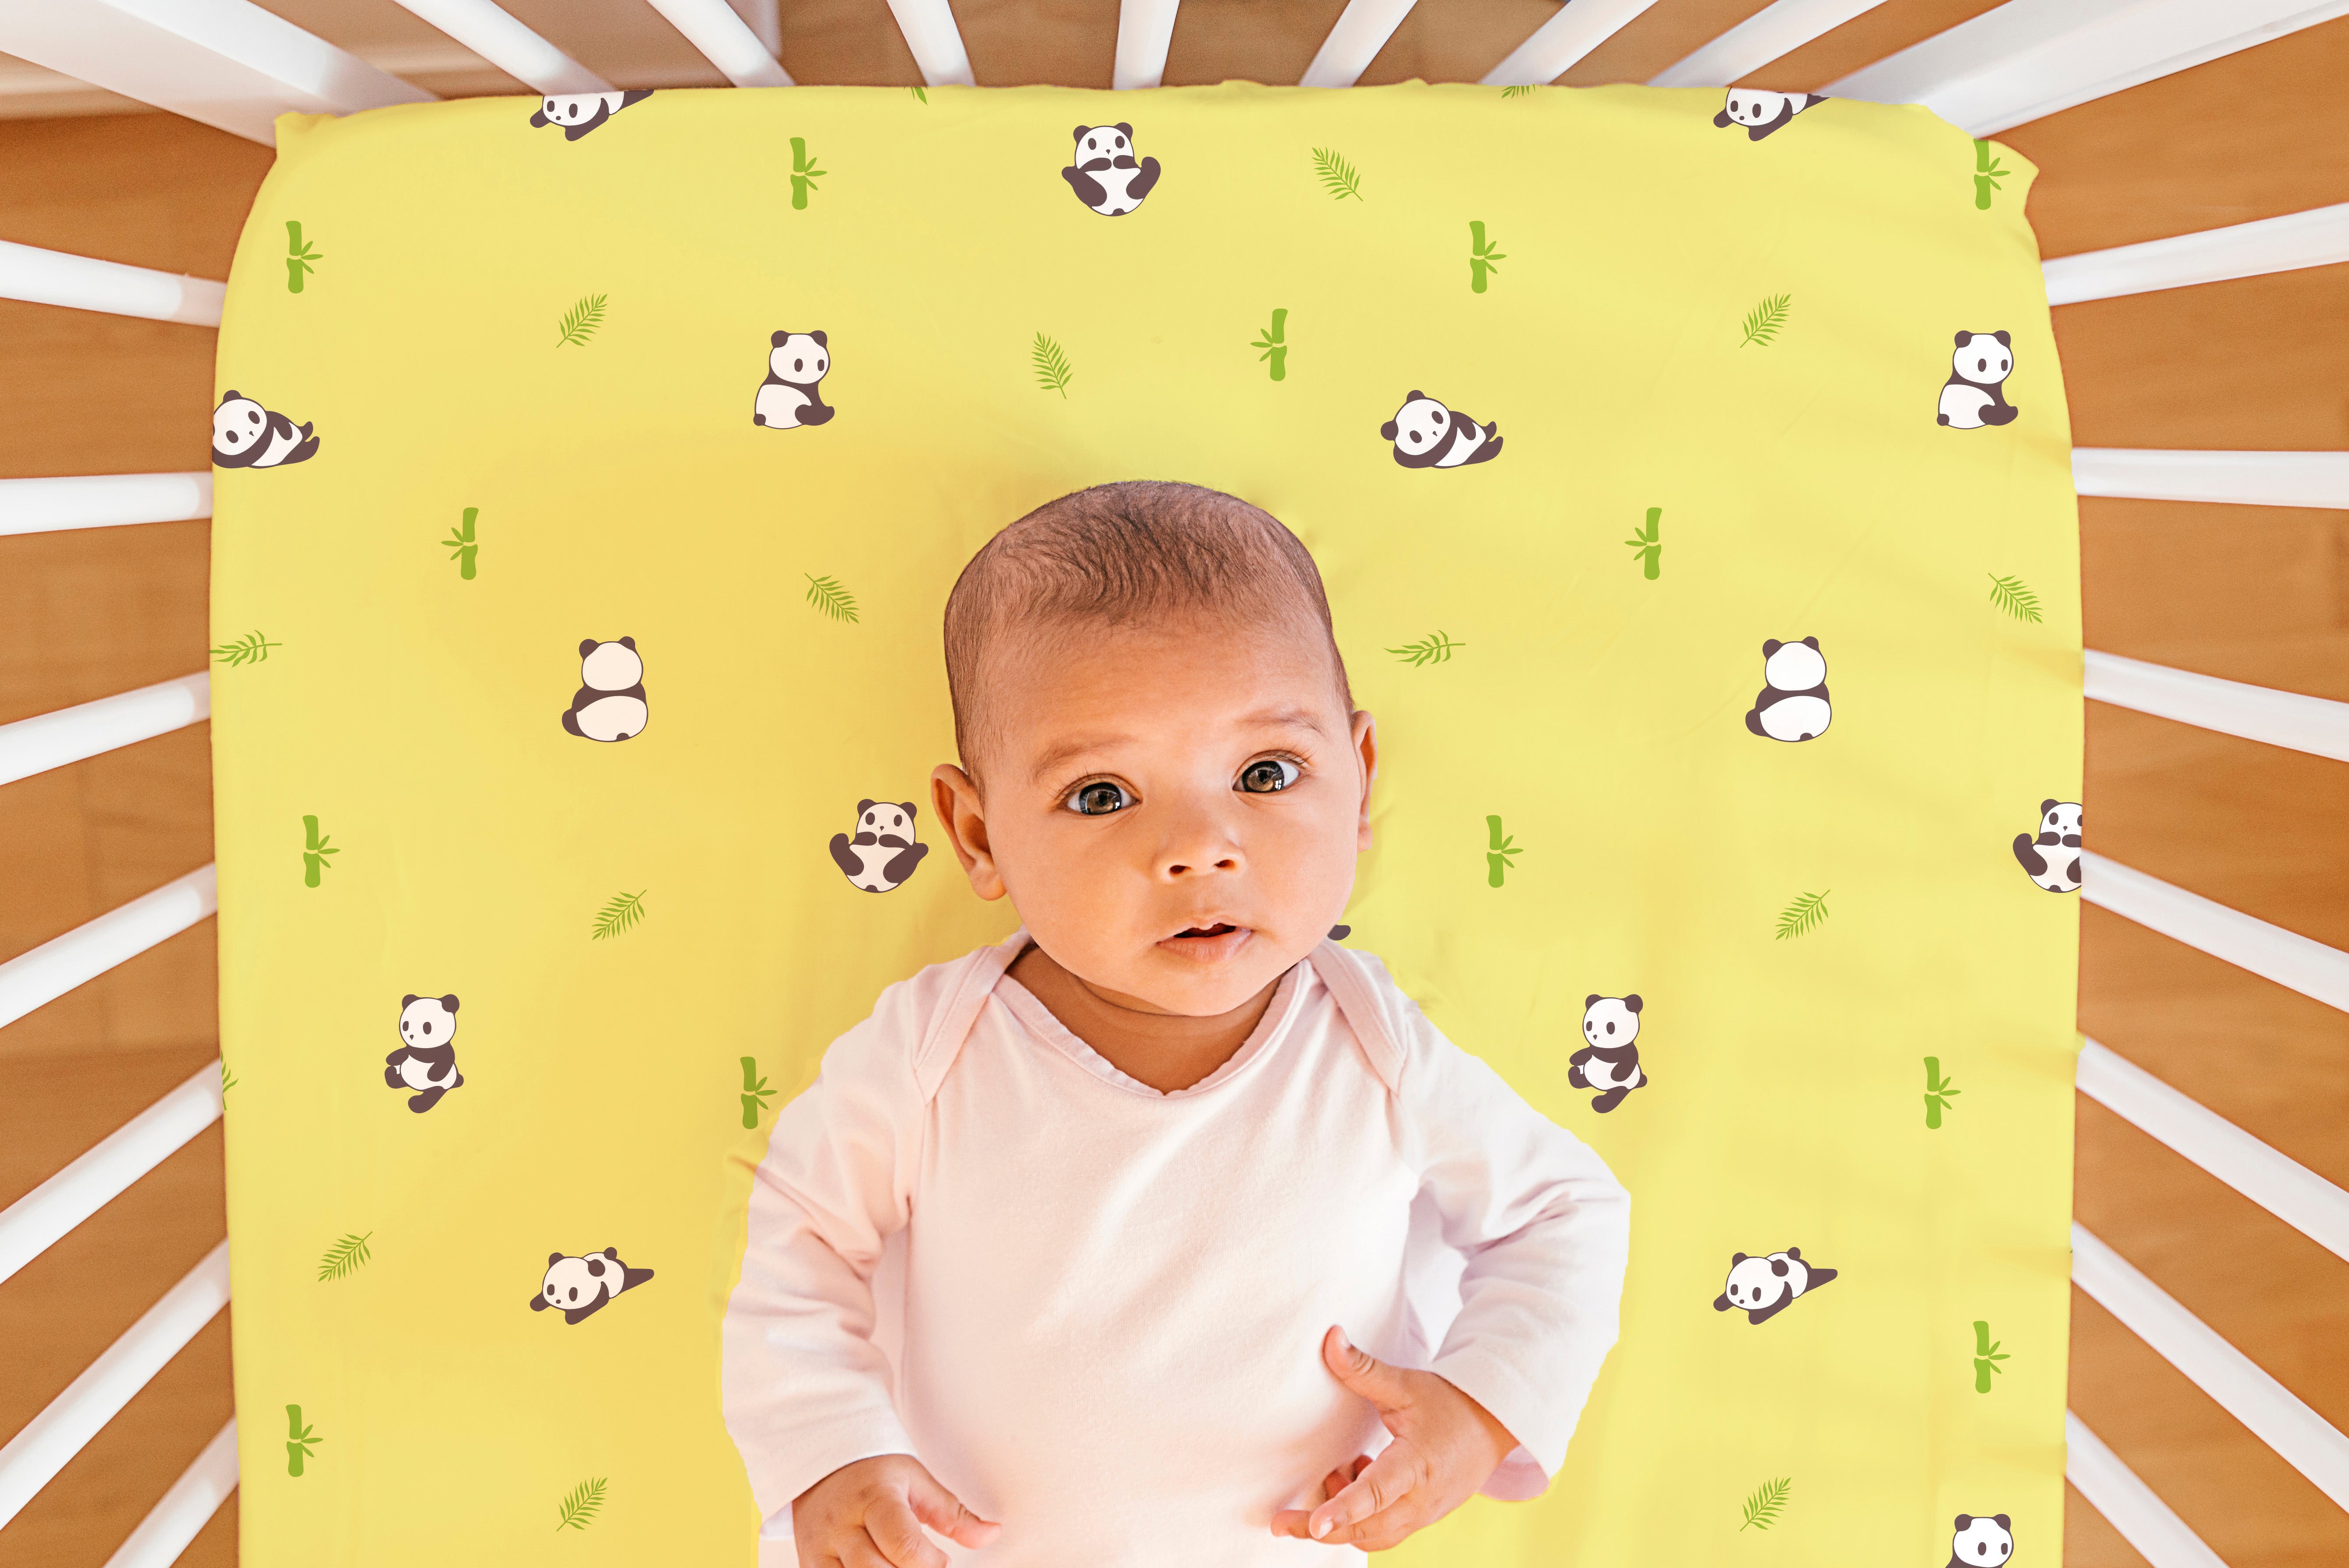 The White Cradle Pure Organic Cotton Fitted Cot Sheet for Baby Crib - Super Soft, Smooth, Absorbent, Twill Fabric for Infants, Newborns, Babies, Toddlers - Yellow Panda